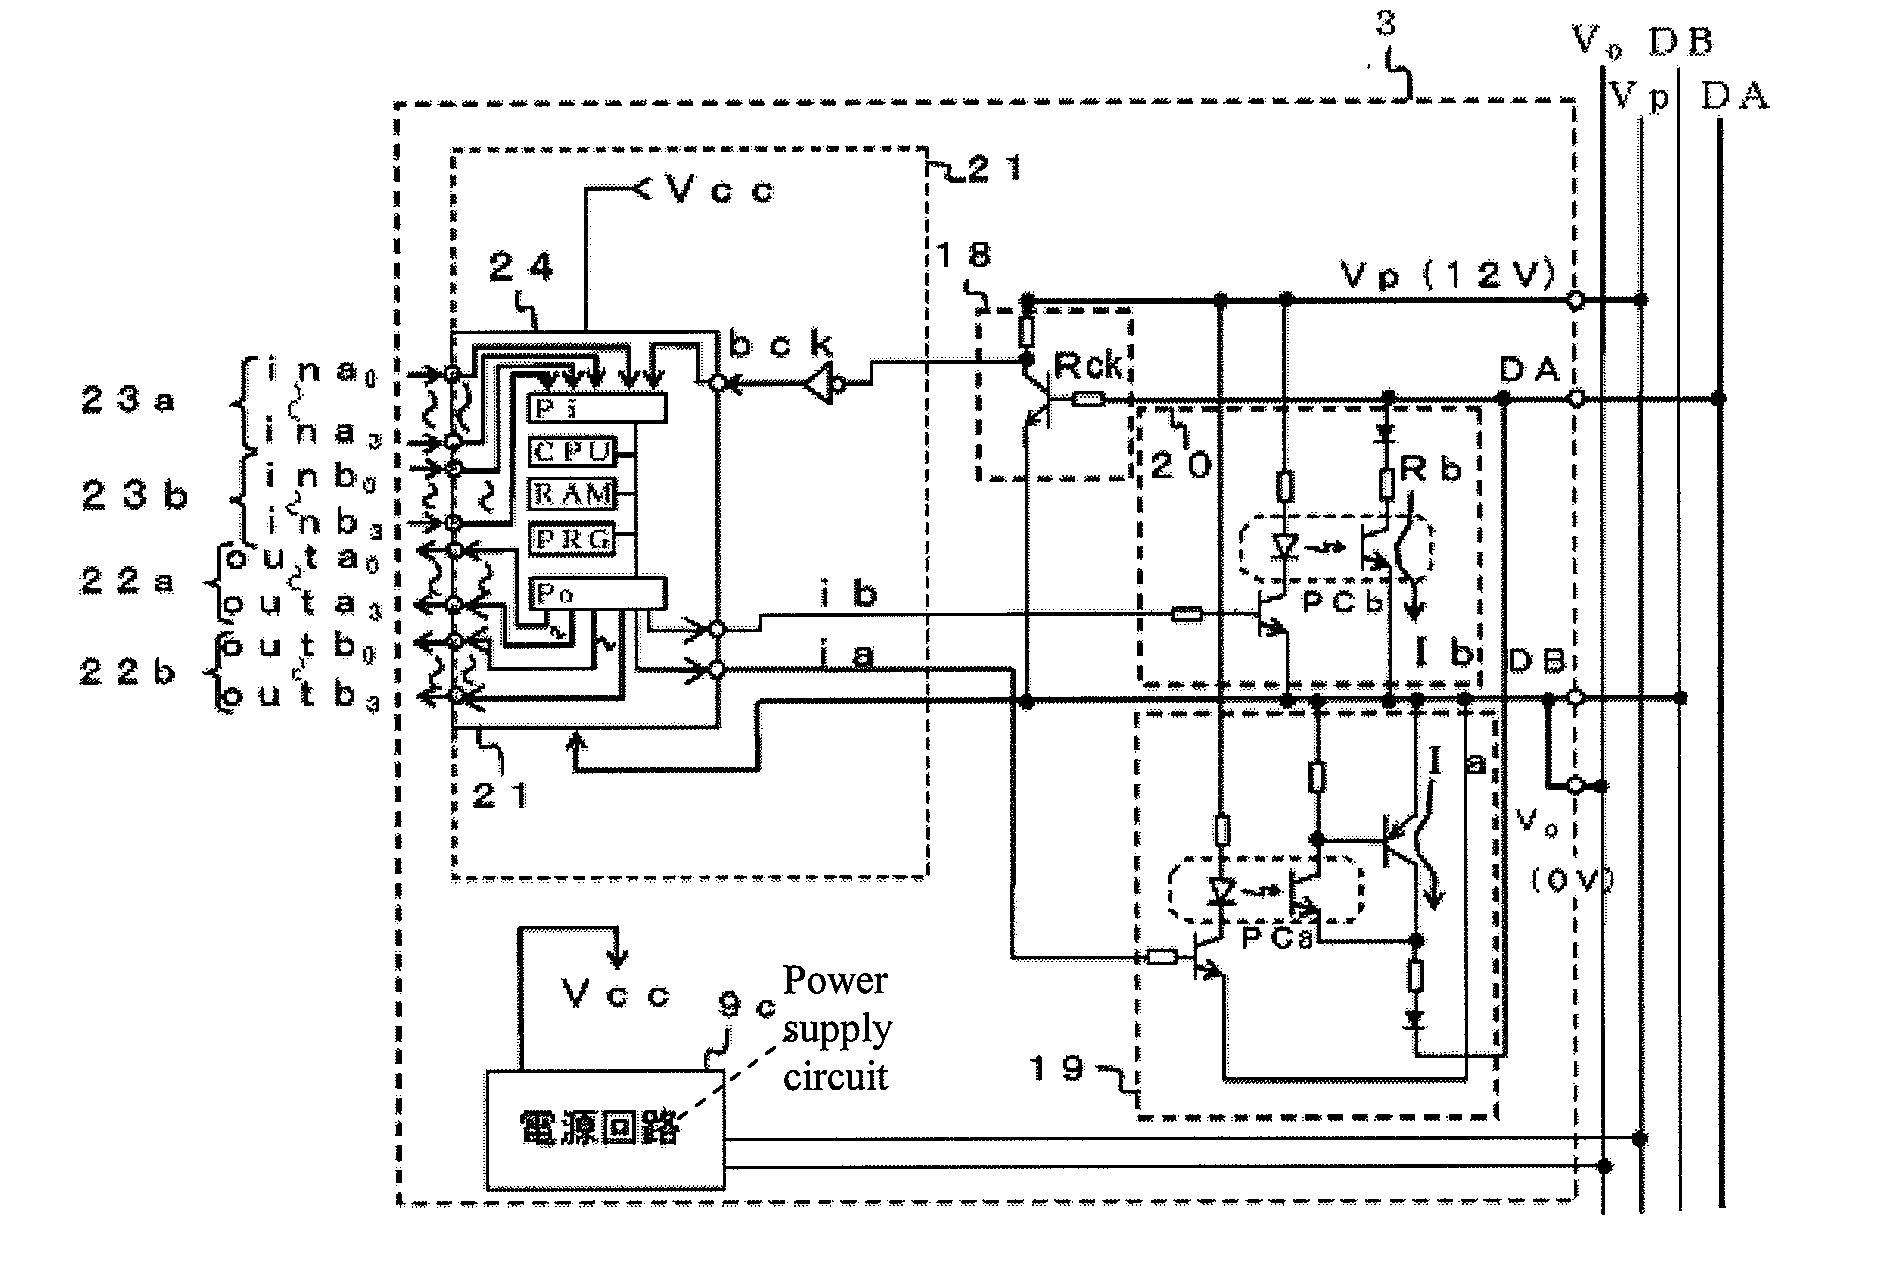 Control and monitor signal transmission system